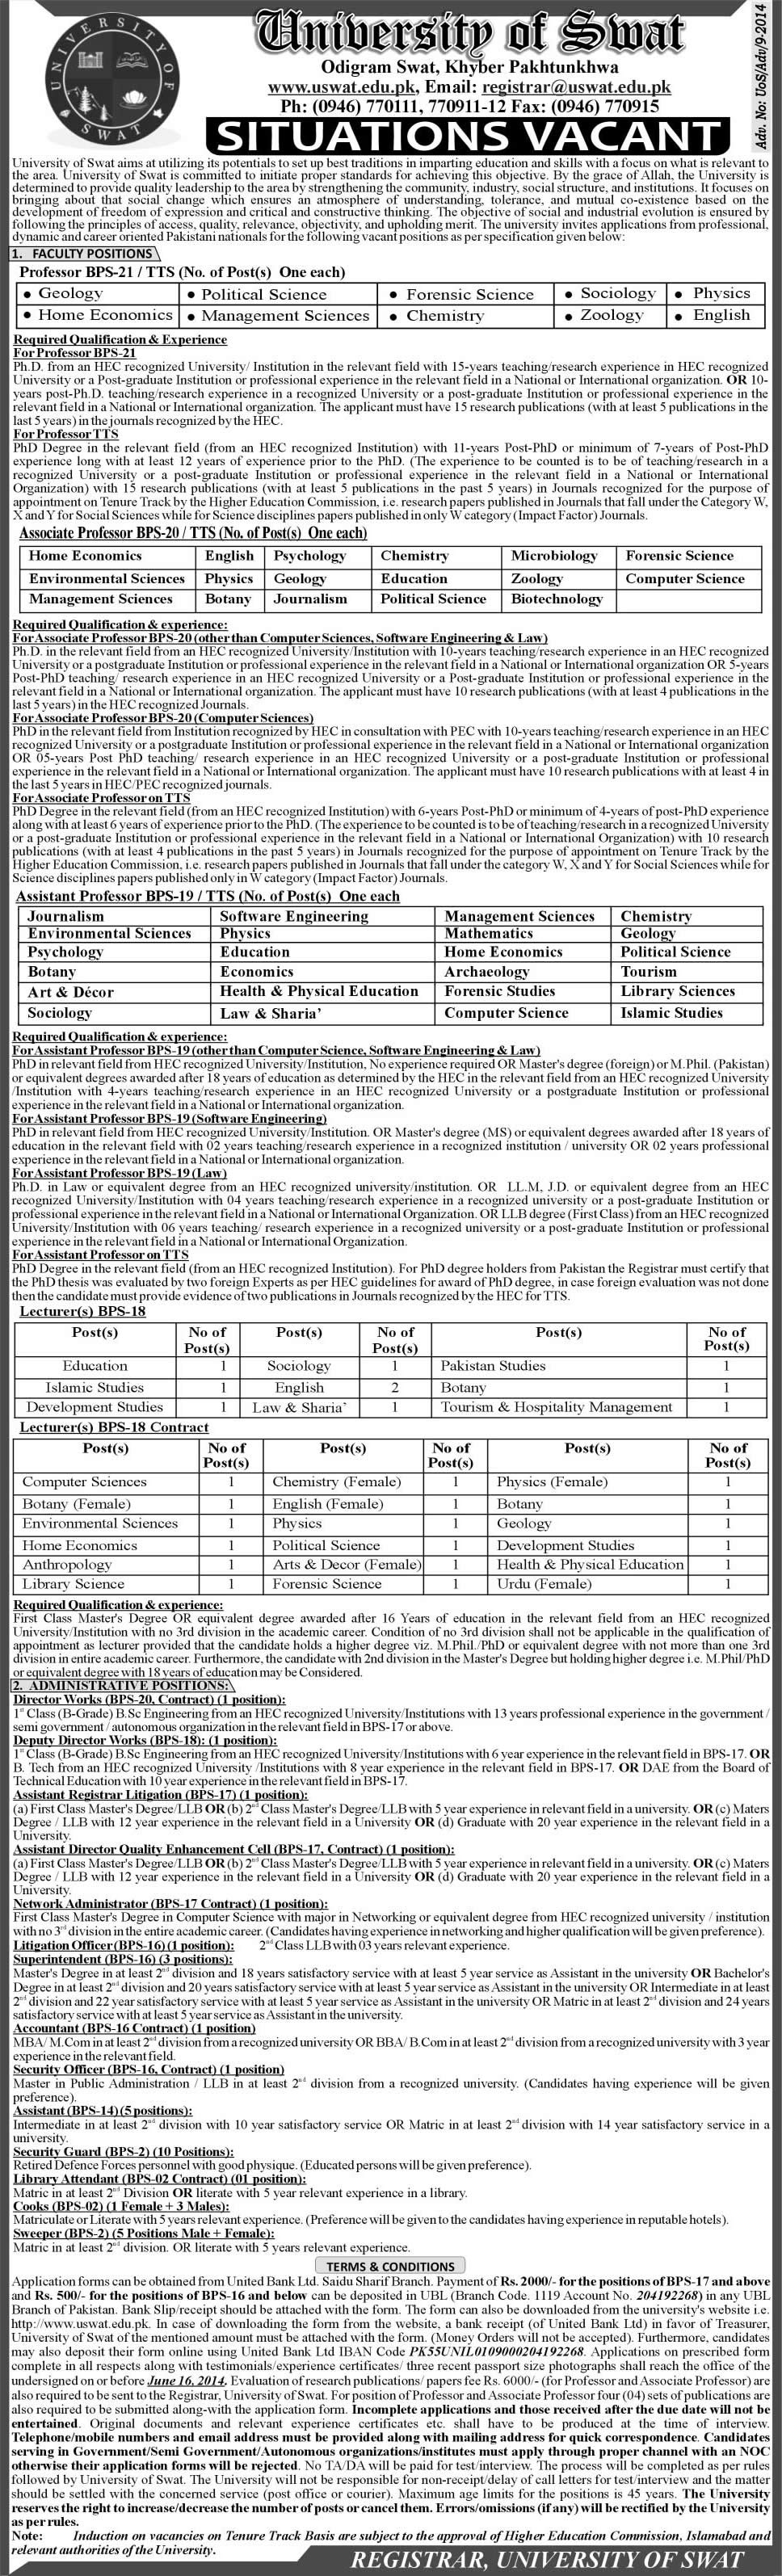 University of Swat Jobs 2014 May for Teaching Faculty & Non-Teaching Staff